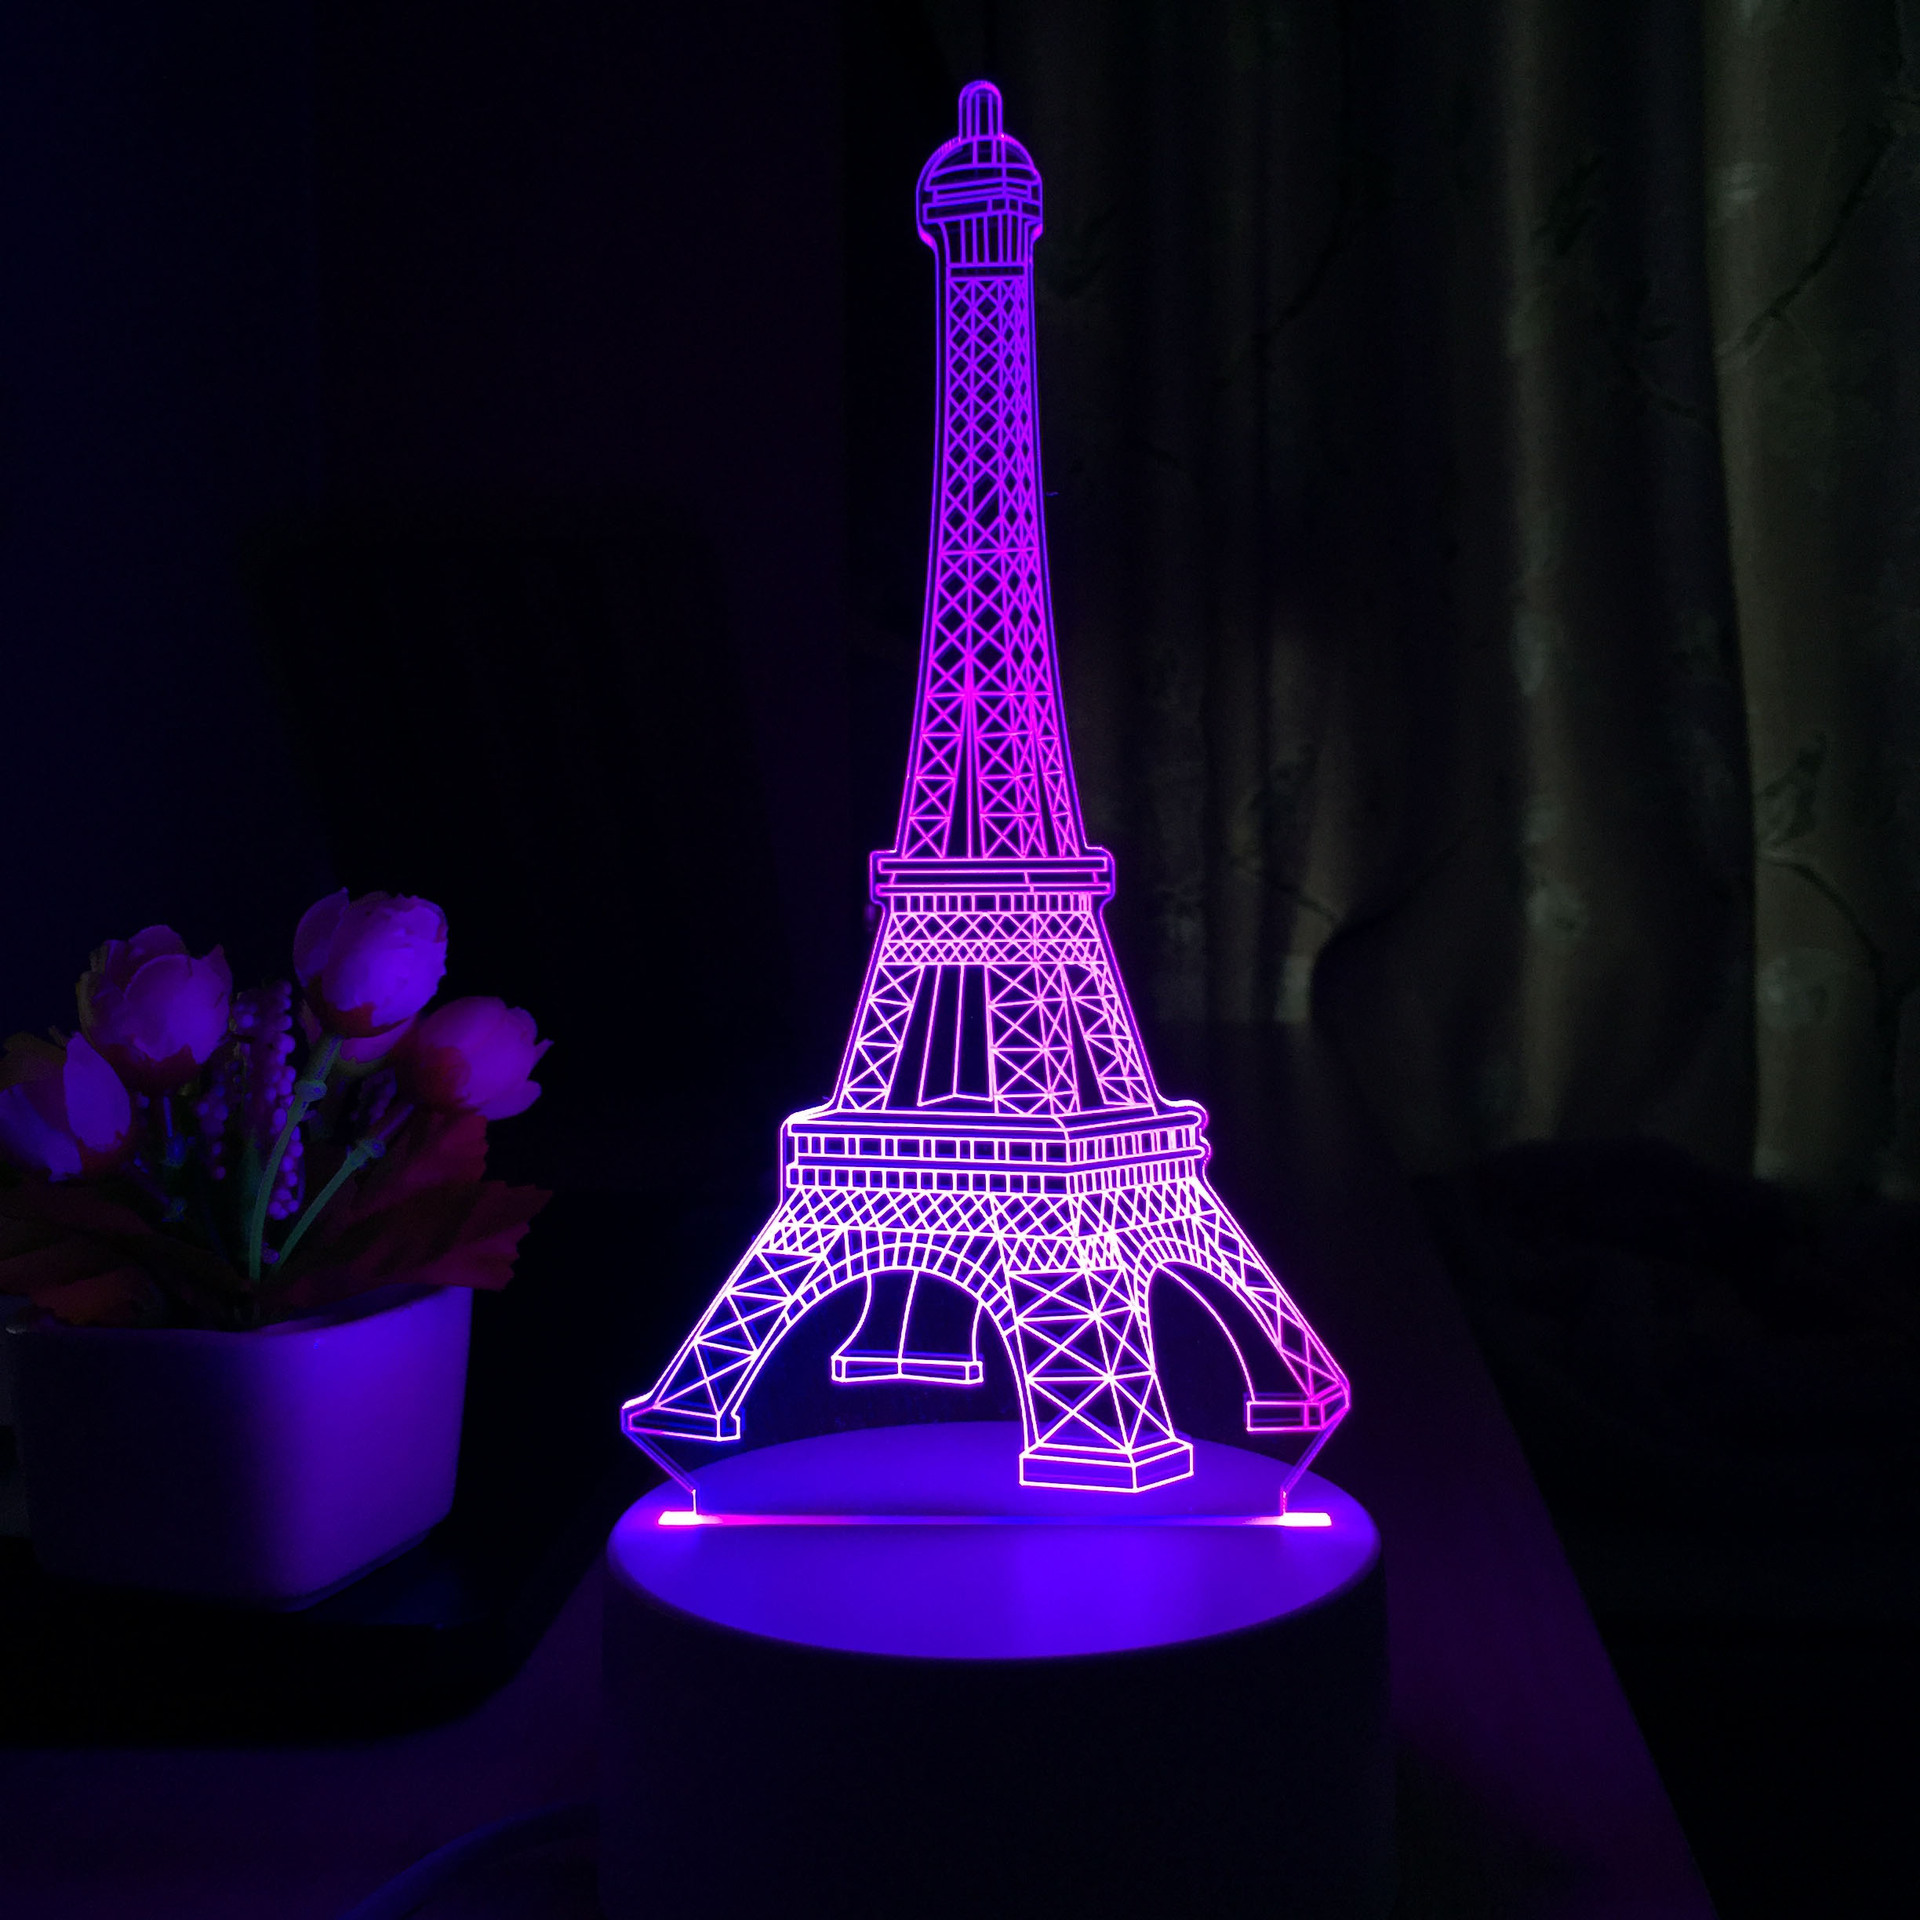 New Strange Creative Gift LED Night Light Plug-in Charging Bedroom Bedside Lamp Cartoon Small Table Lamp